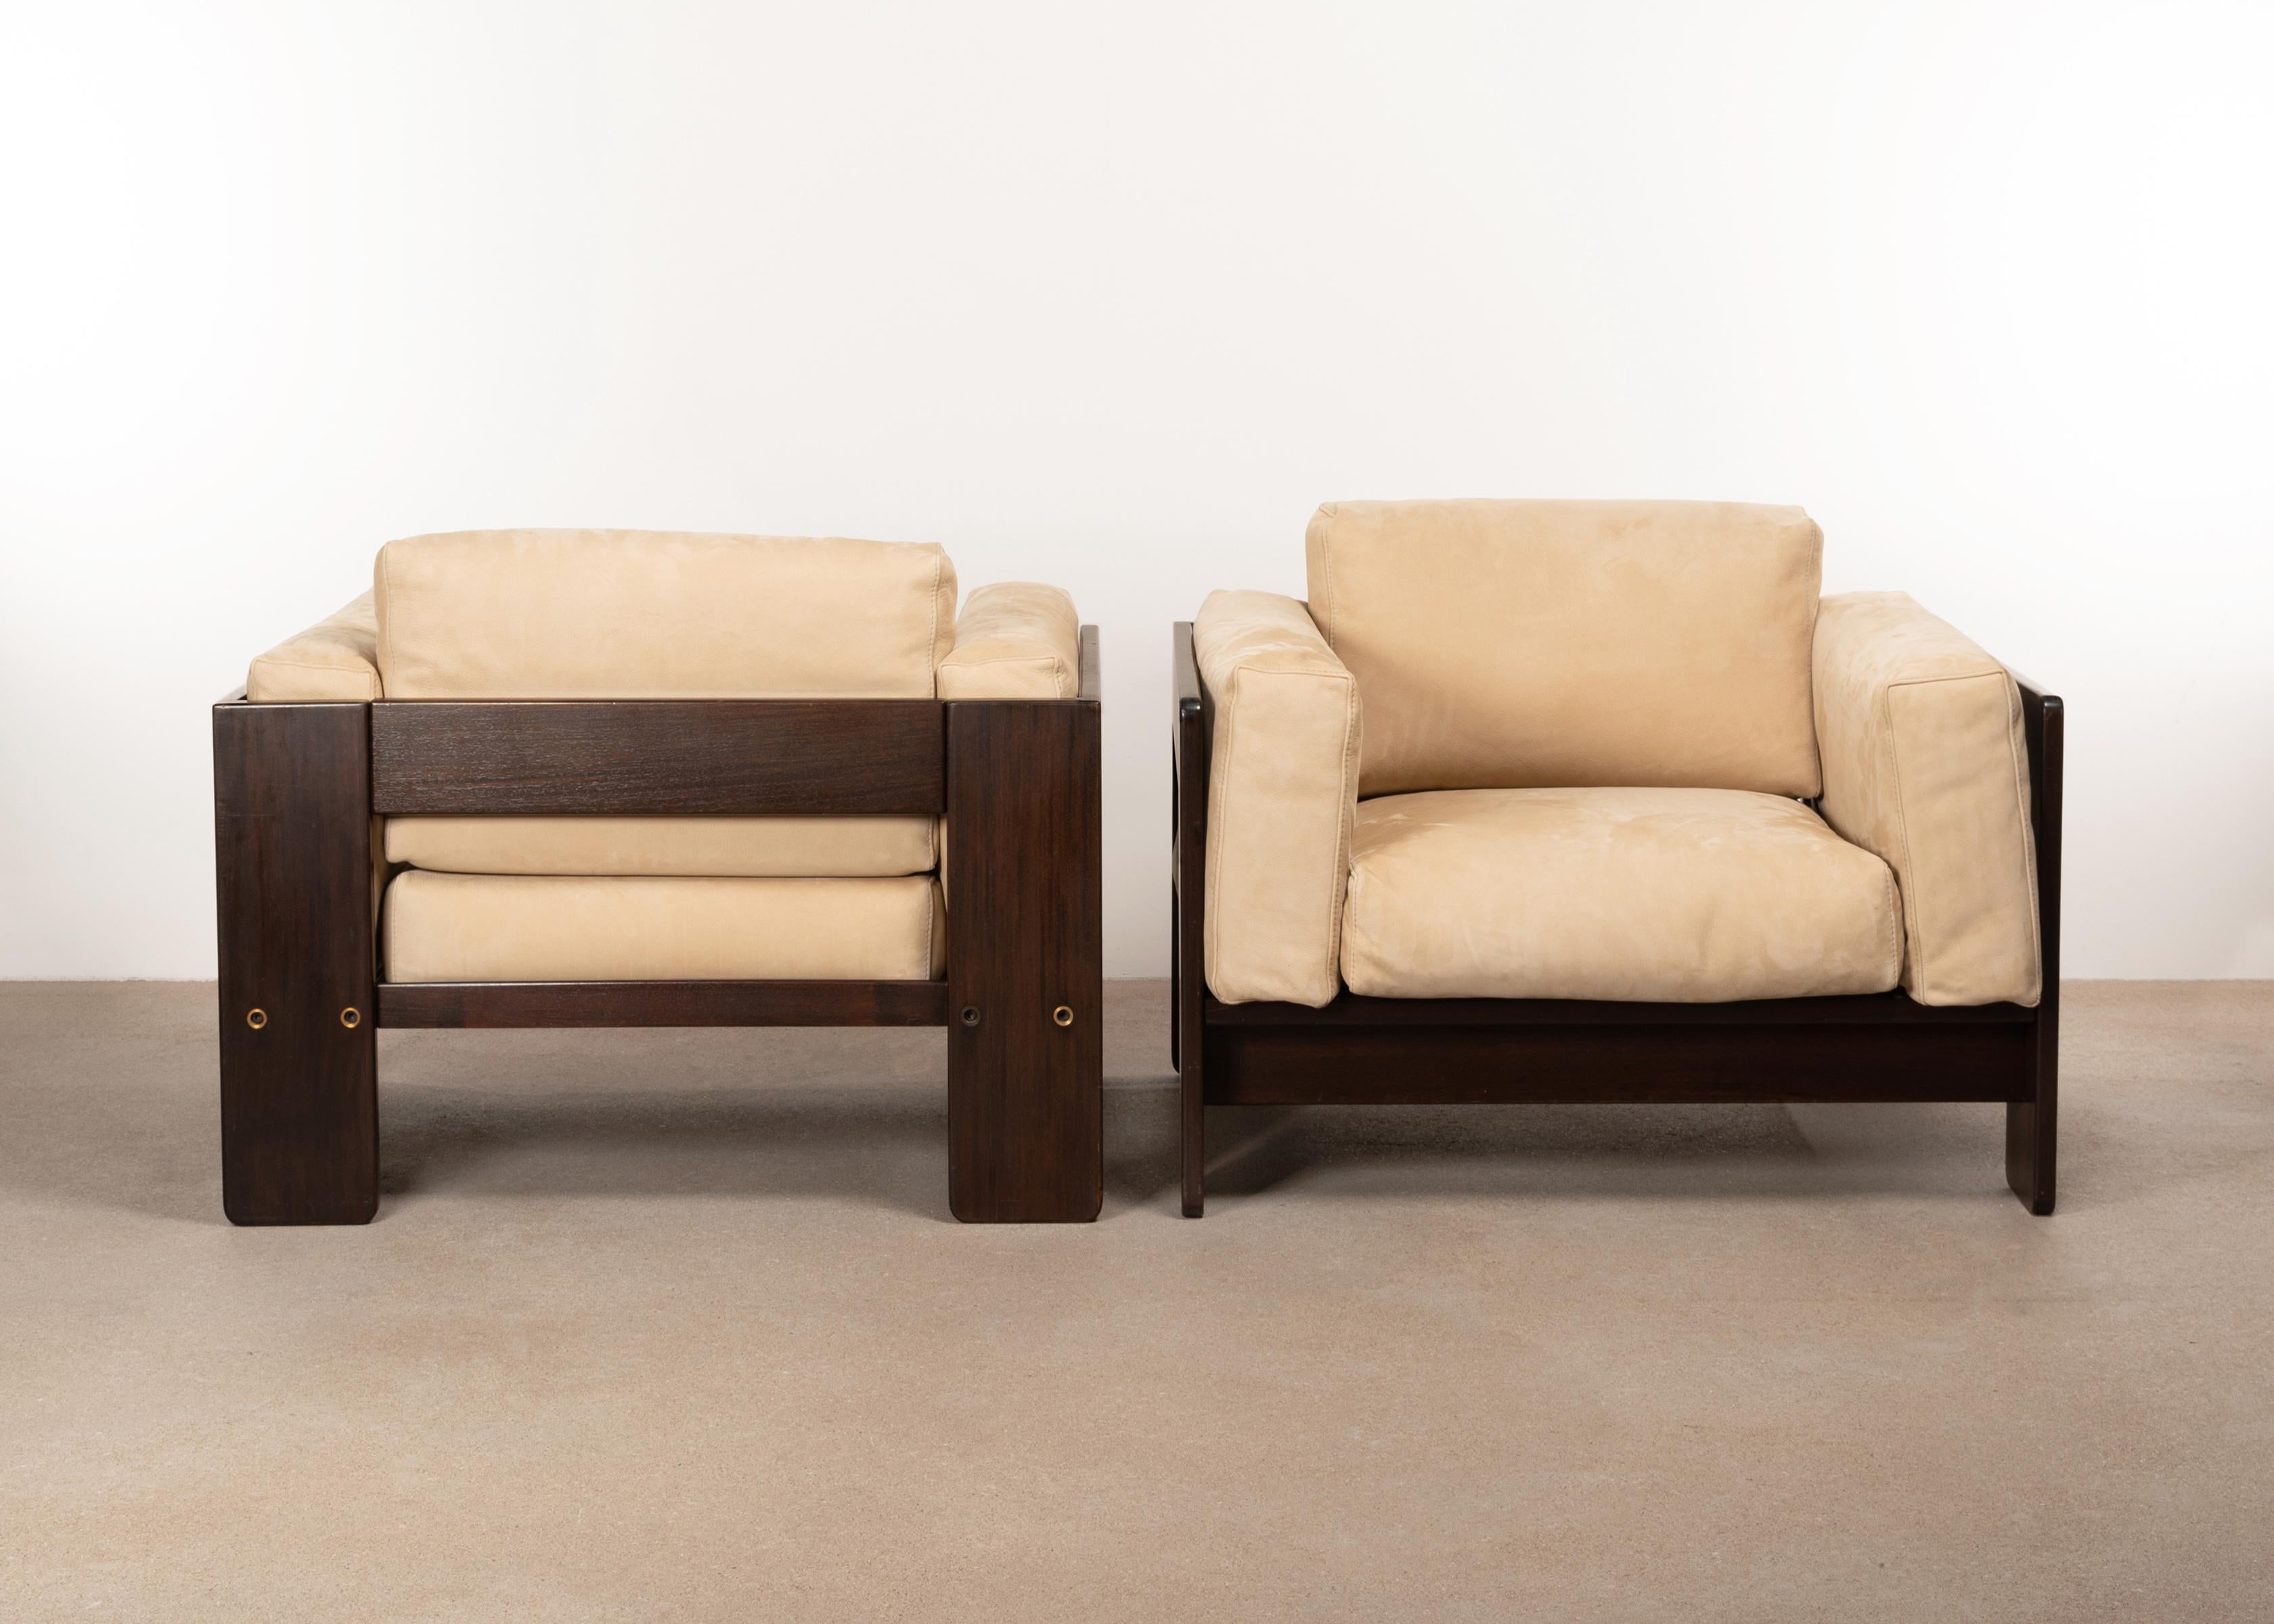 Mid-Century Modern Tobia Scarpa Bastiano Lounge Chairs in Walnut and Beige Suede Leather for Knoll